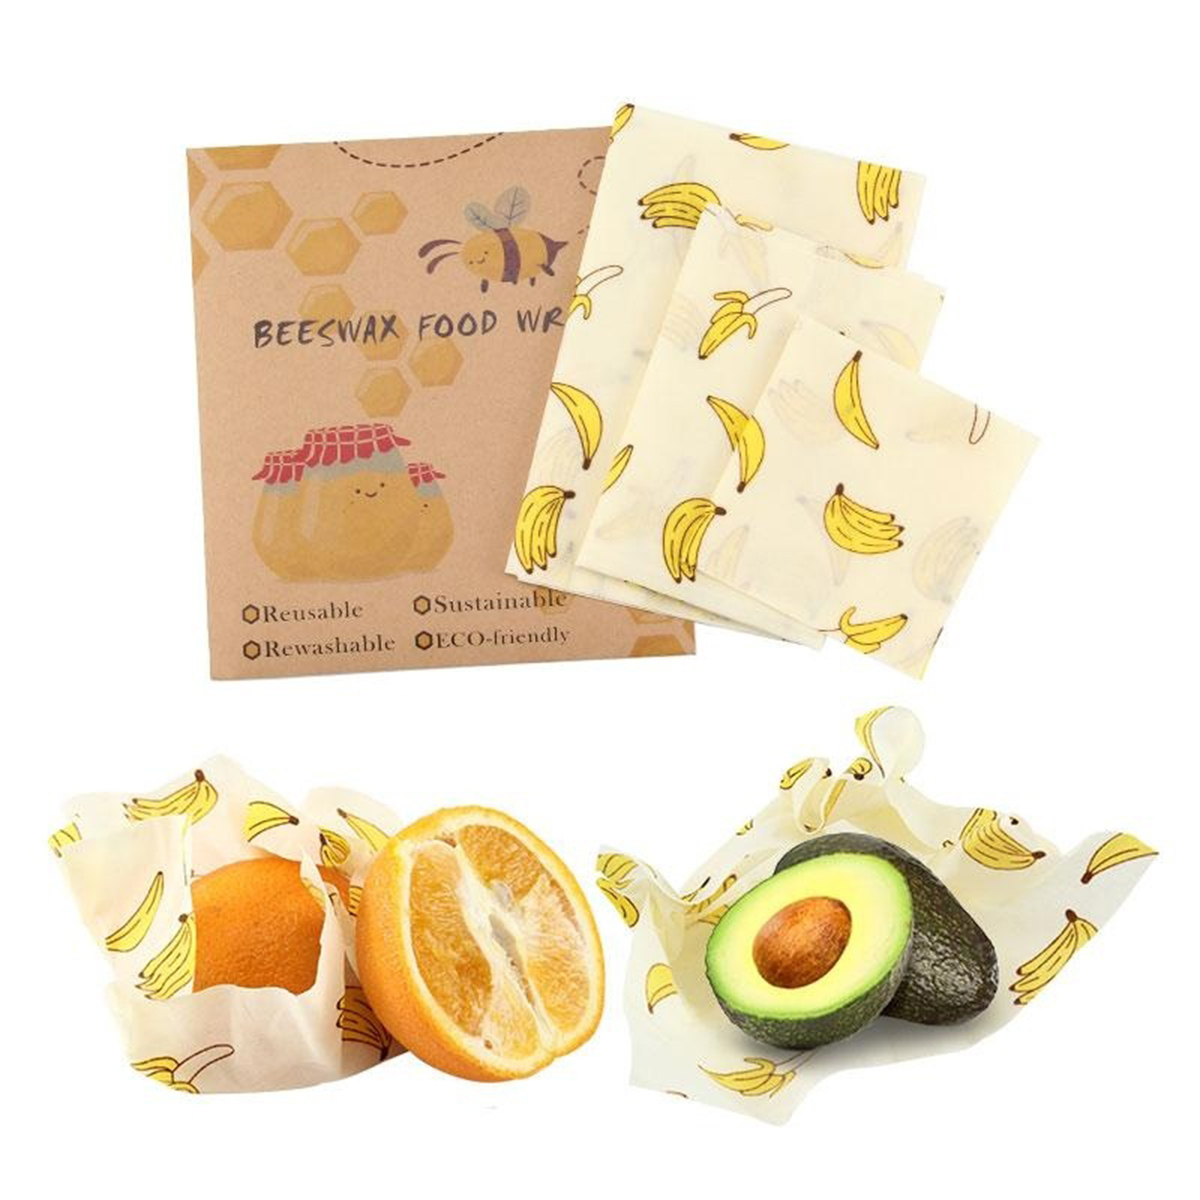 Safety-Beeswax-Food-Wrap-Fresh-Keeping-Reusable-Paper-Seal-Storage-Cover-1583302-5